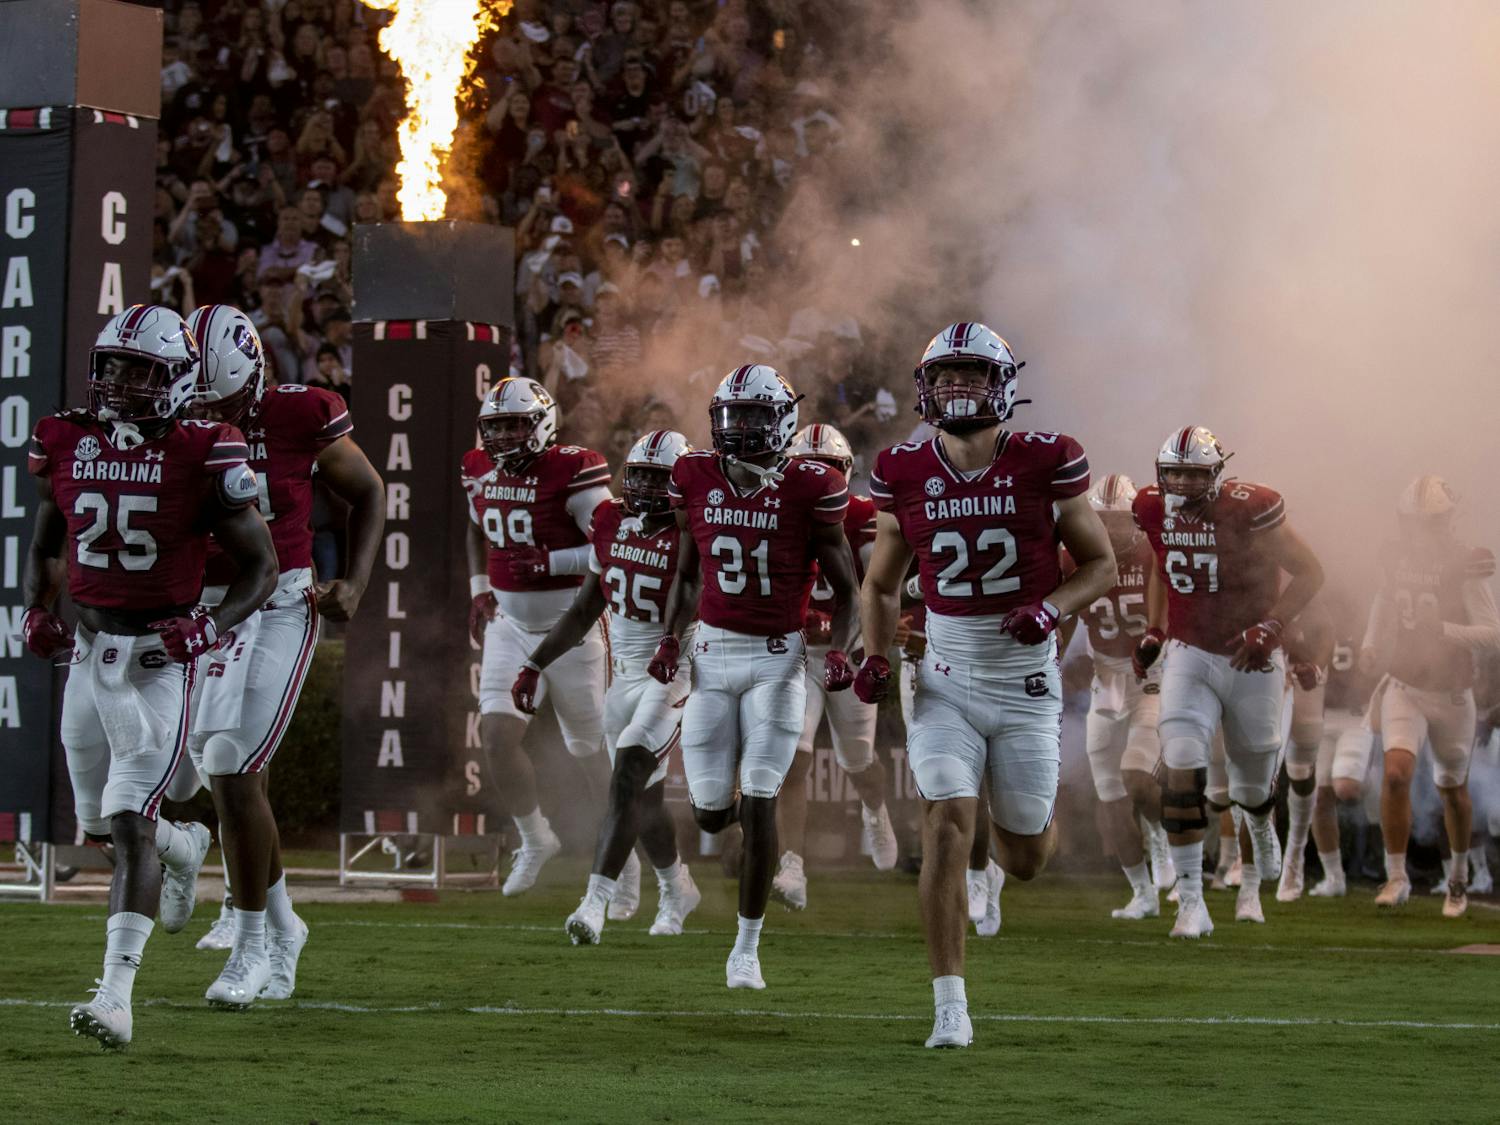 The Gamecocks run out of the tunnel before their matchup against Charlotte Sept. 24, 2022. South Carolina won 56-20.&nbsp;